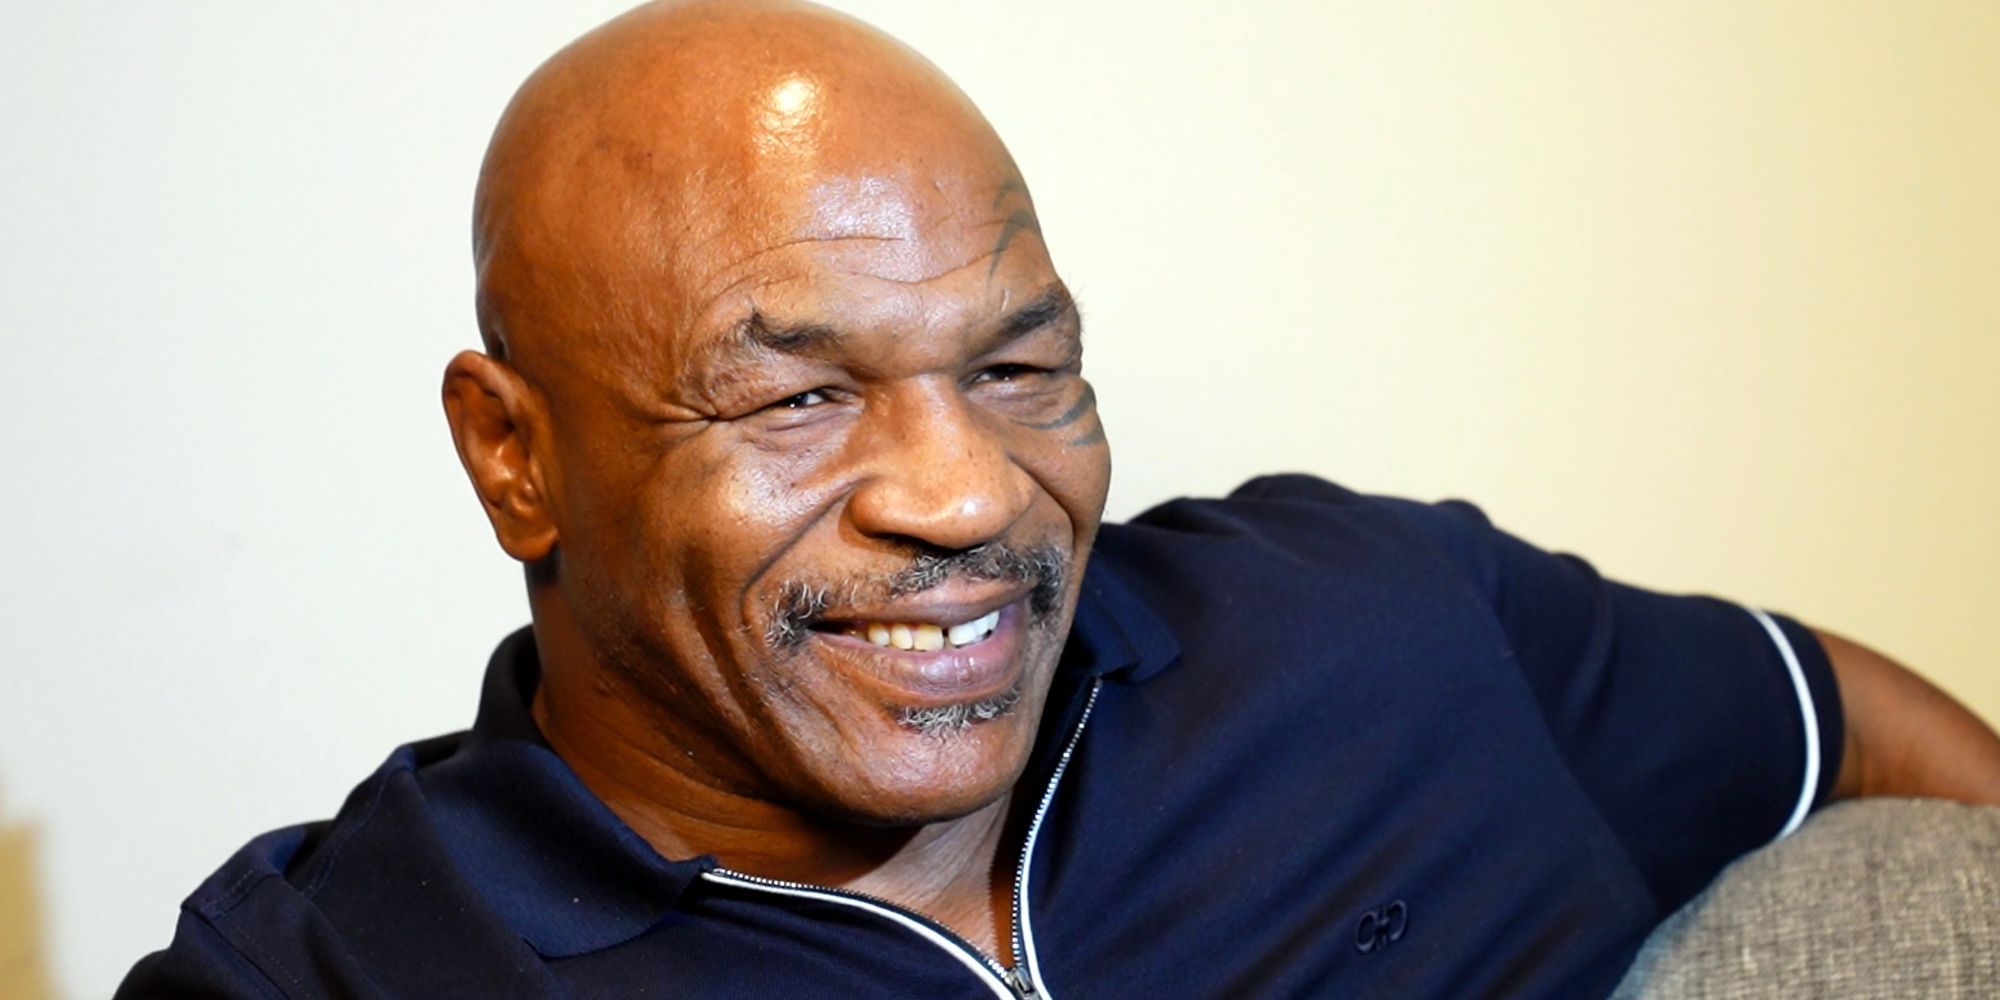 Mike tyson smiling